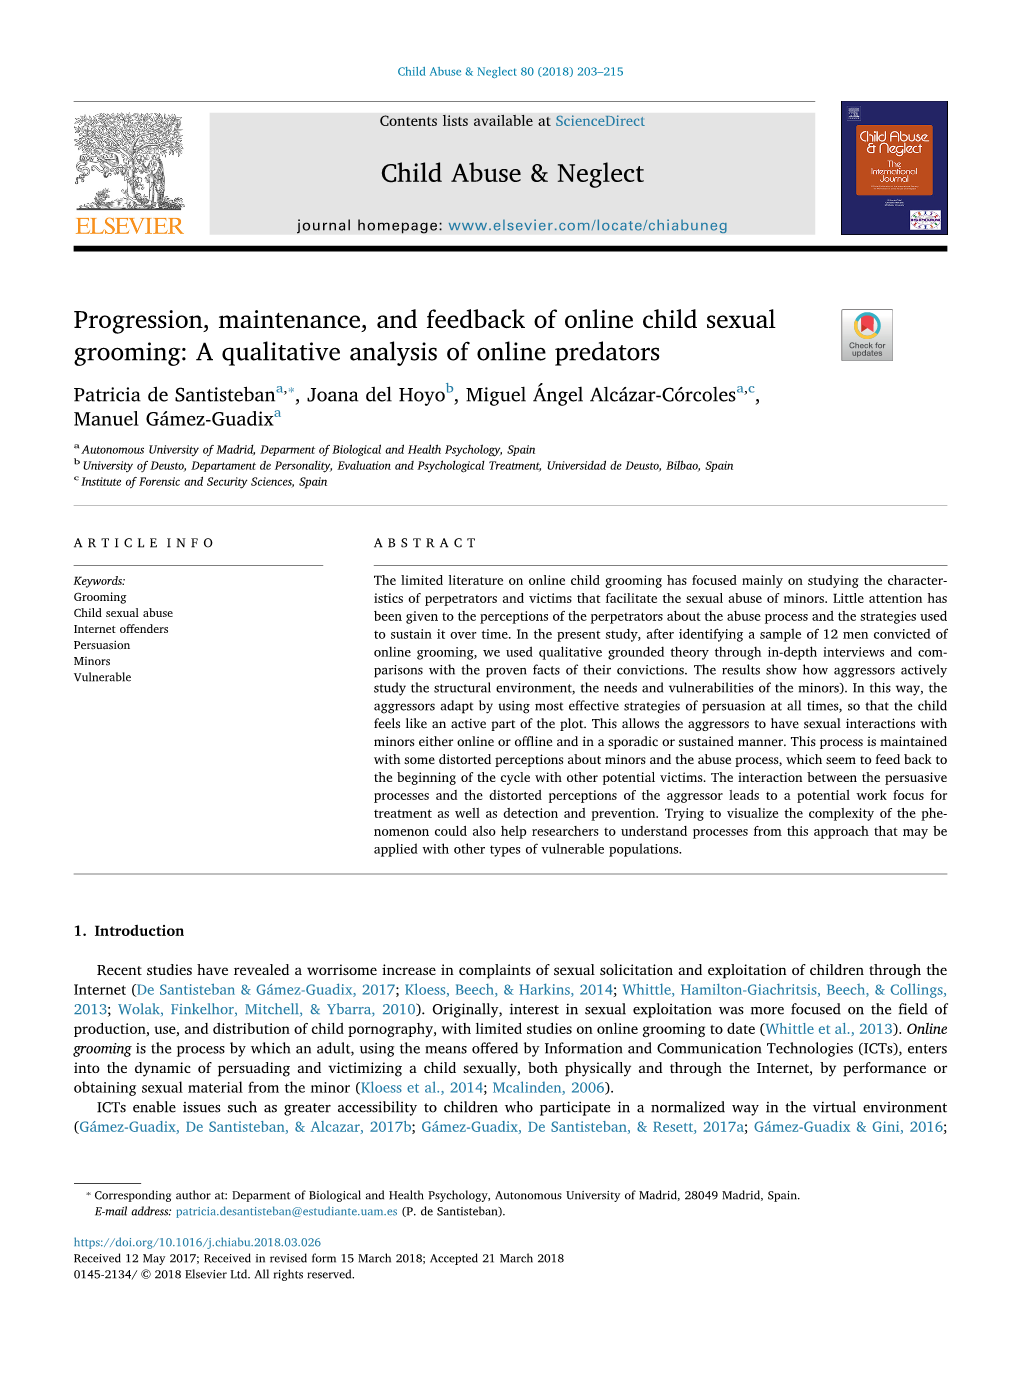 Progression, Maintenance, and Feedback of Online Child Sexual Grooming a Qualitative Analysis of Online Predators